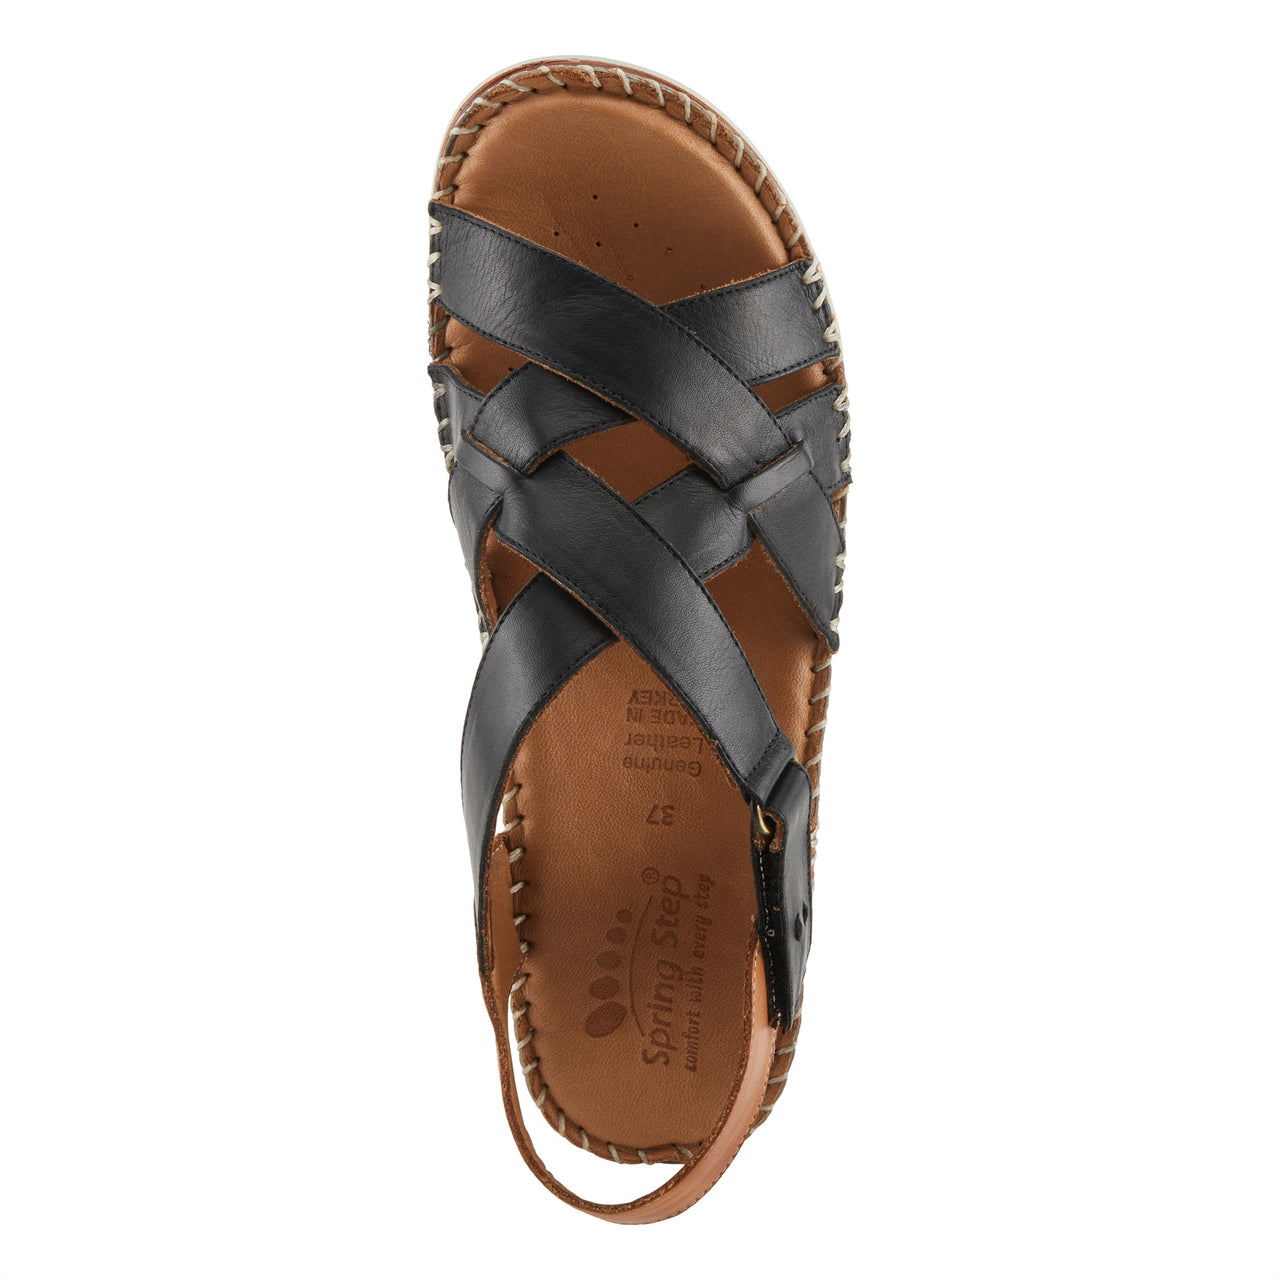 Elegant Spring Step Migula Sandals with embroidered straps and contoured insole